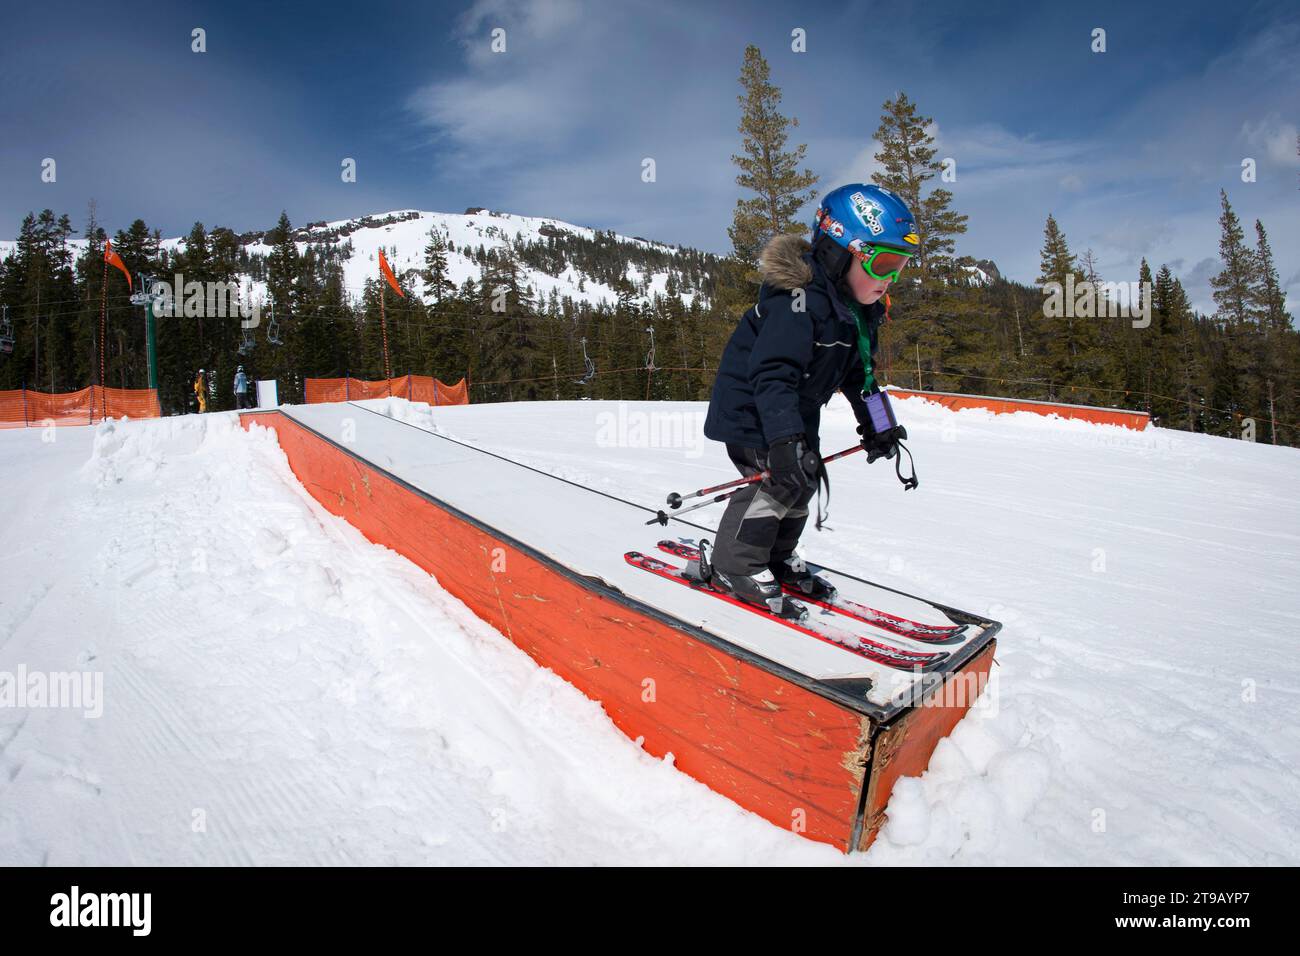 Young skier on a box in a terrain park. Stock Photo